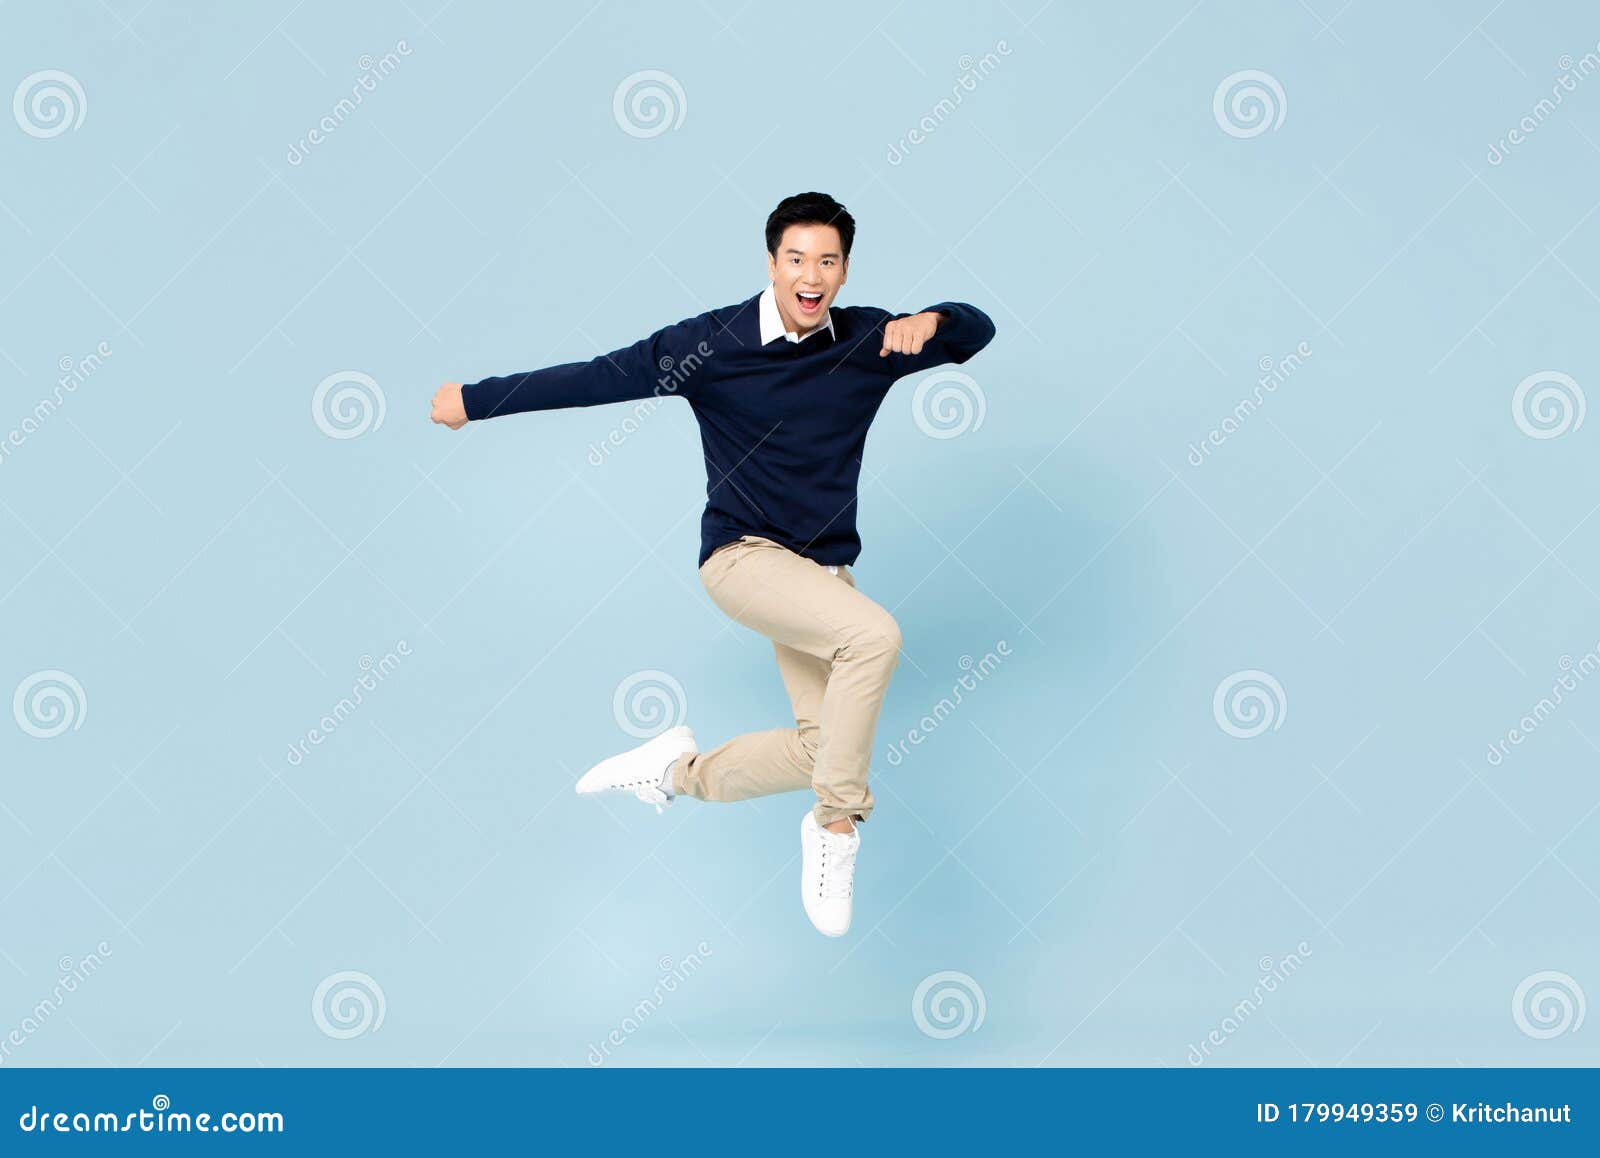 Young Handsome Asian Man Smiling and Jumping Stock Image - Image of ...